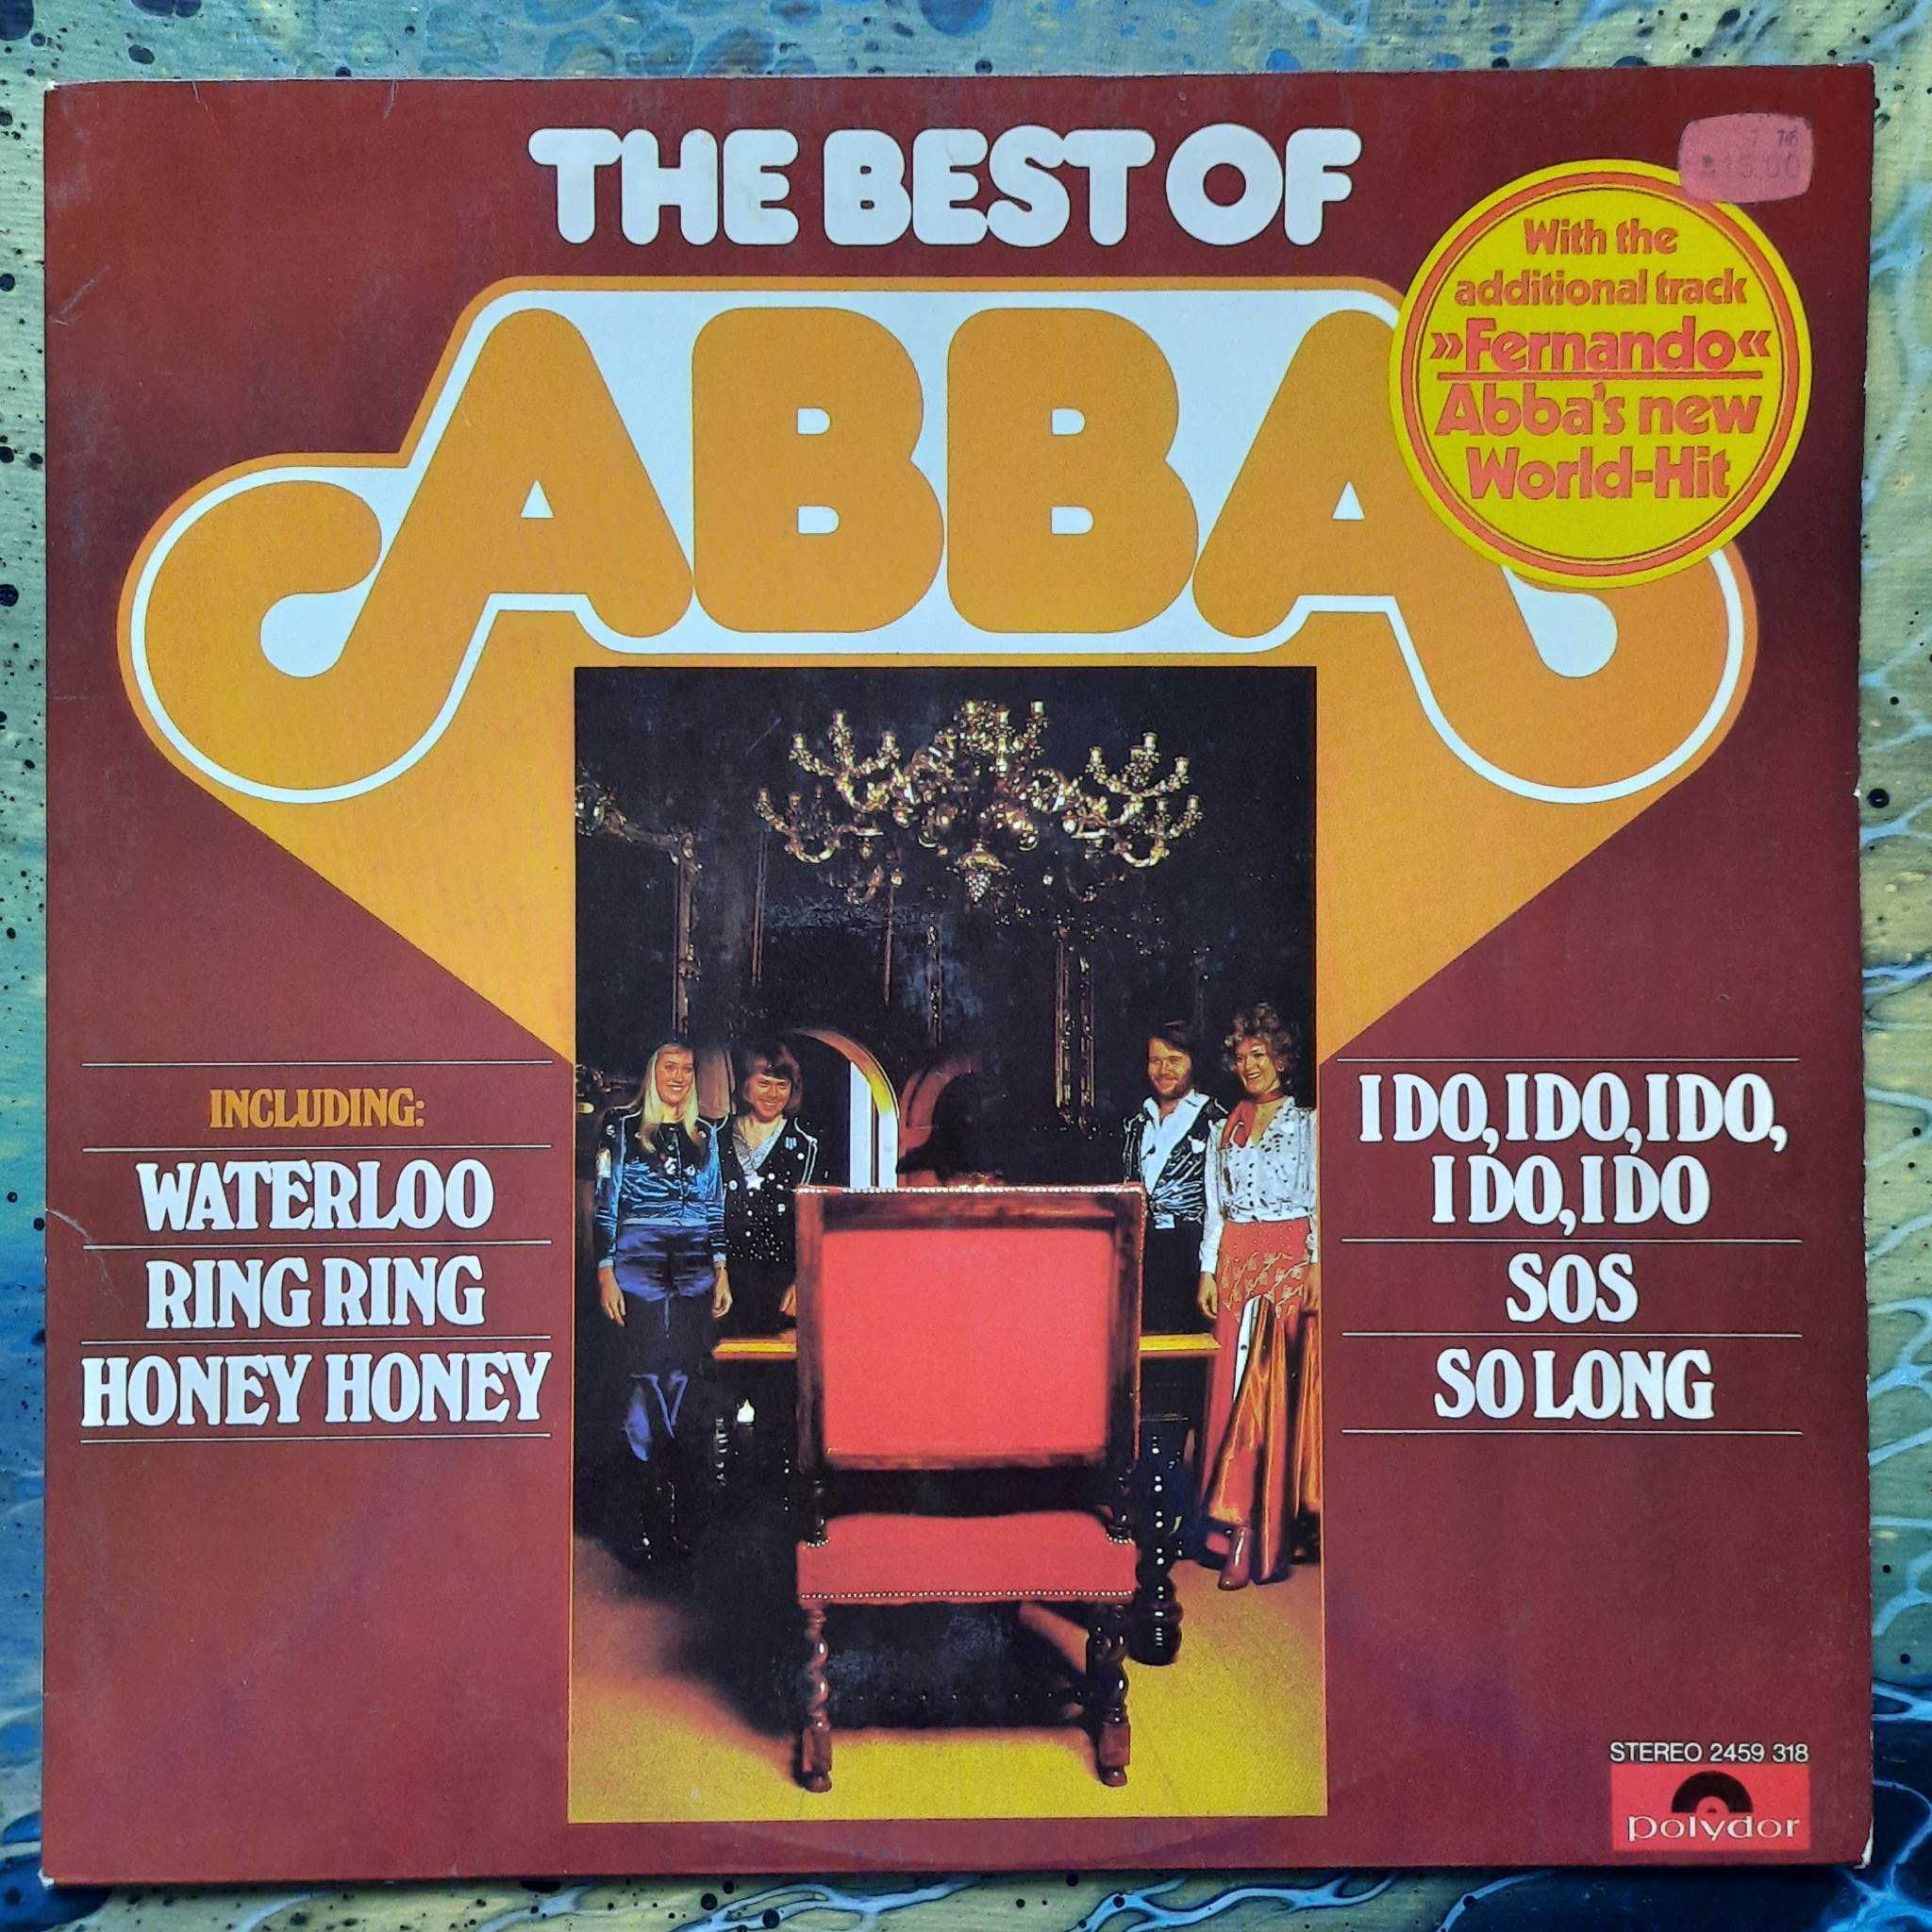 ABBA / The Best Of ABBA // 1976 // Germany / Polydor / Vinyl / LP